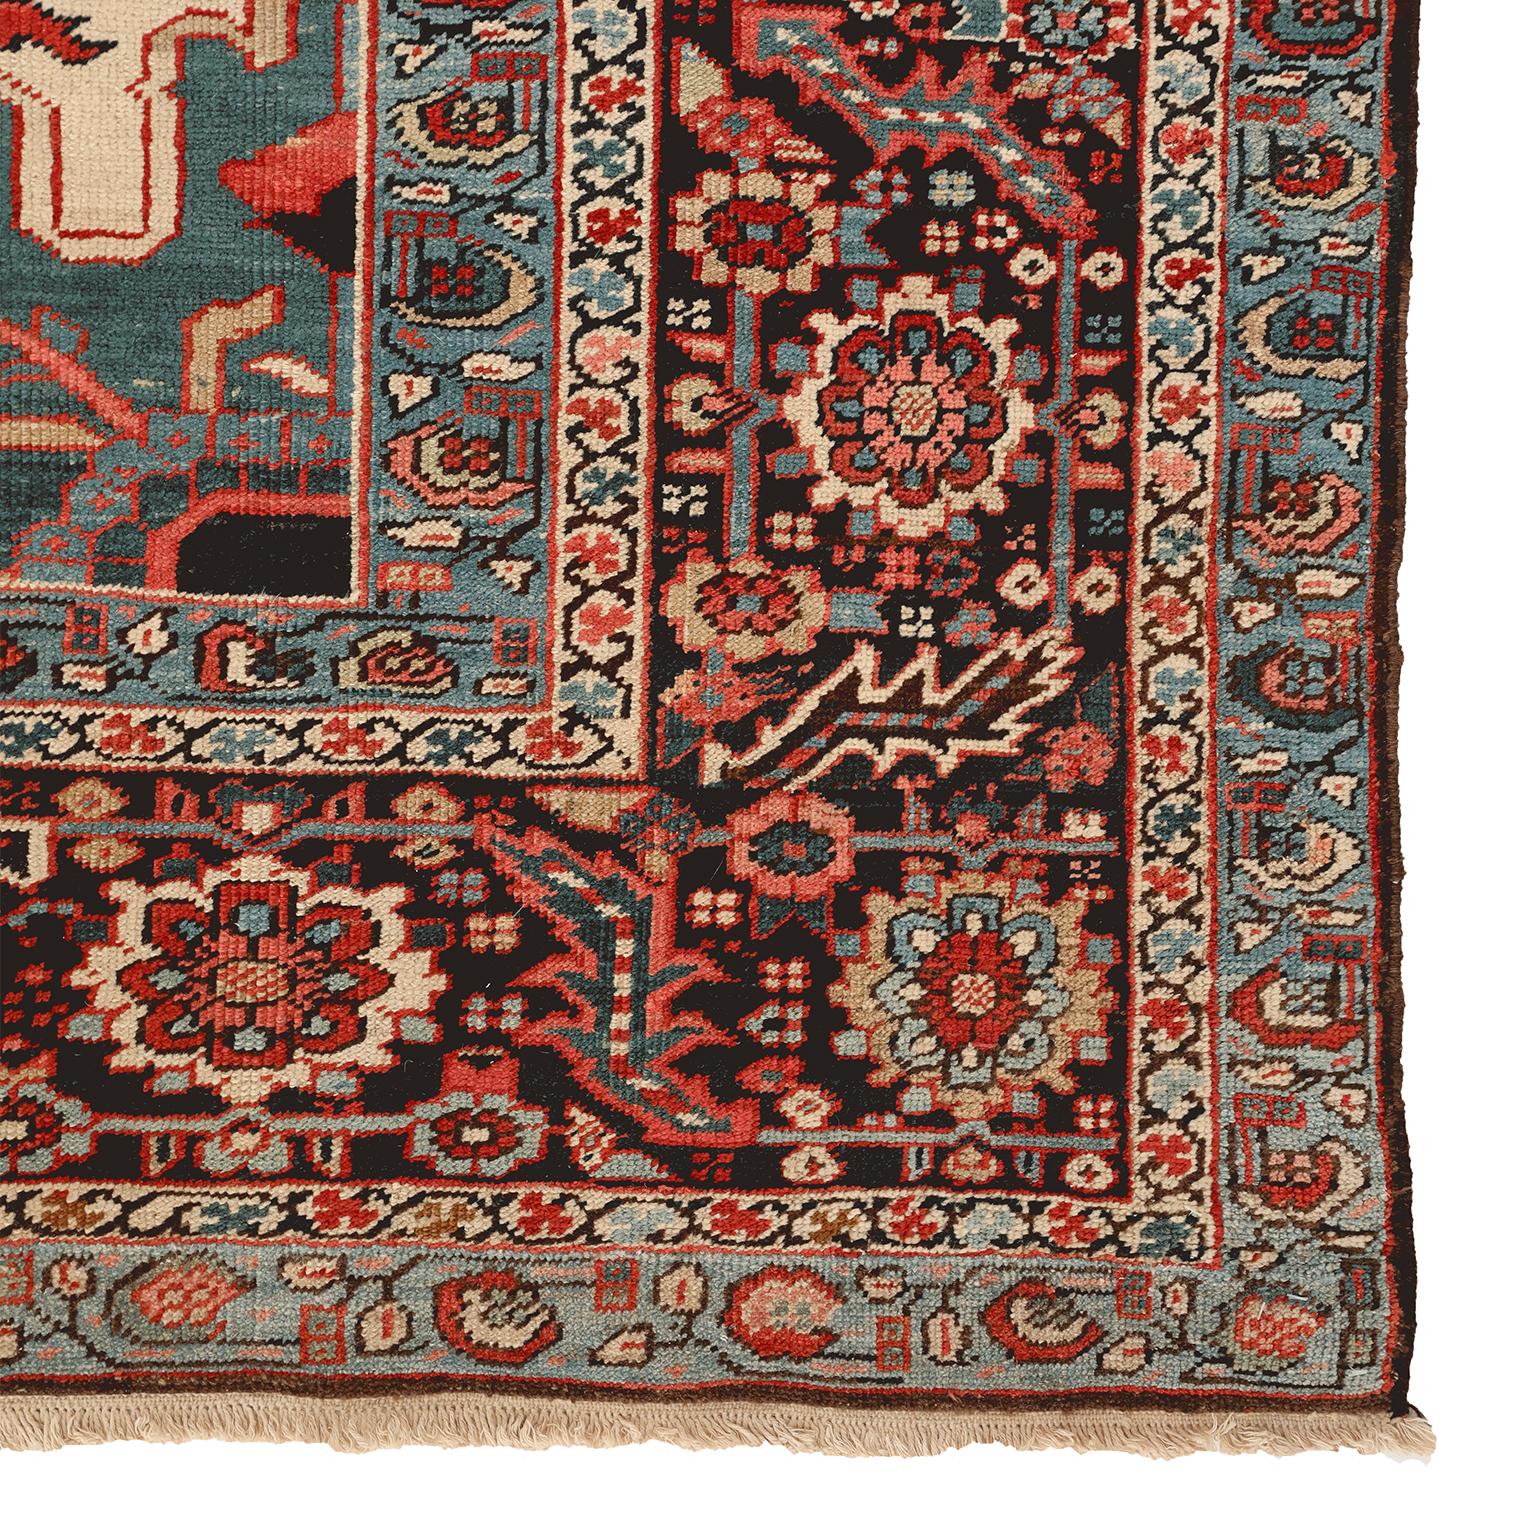 This Heriz Serapi Persian carpet circa 1900 in pure wool and vegetable dyes features a central octagonal medallion and multiple borders in organic colors of red, blue, green, cream, brown and indigo. Natural color variation and striation add further